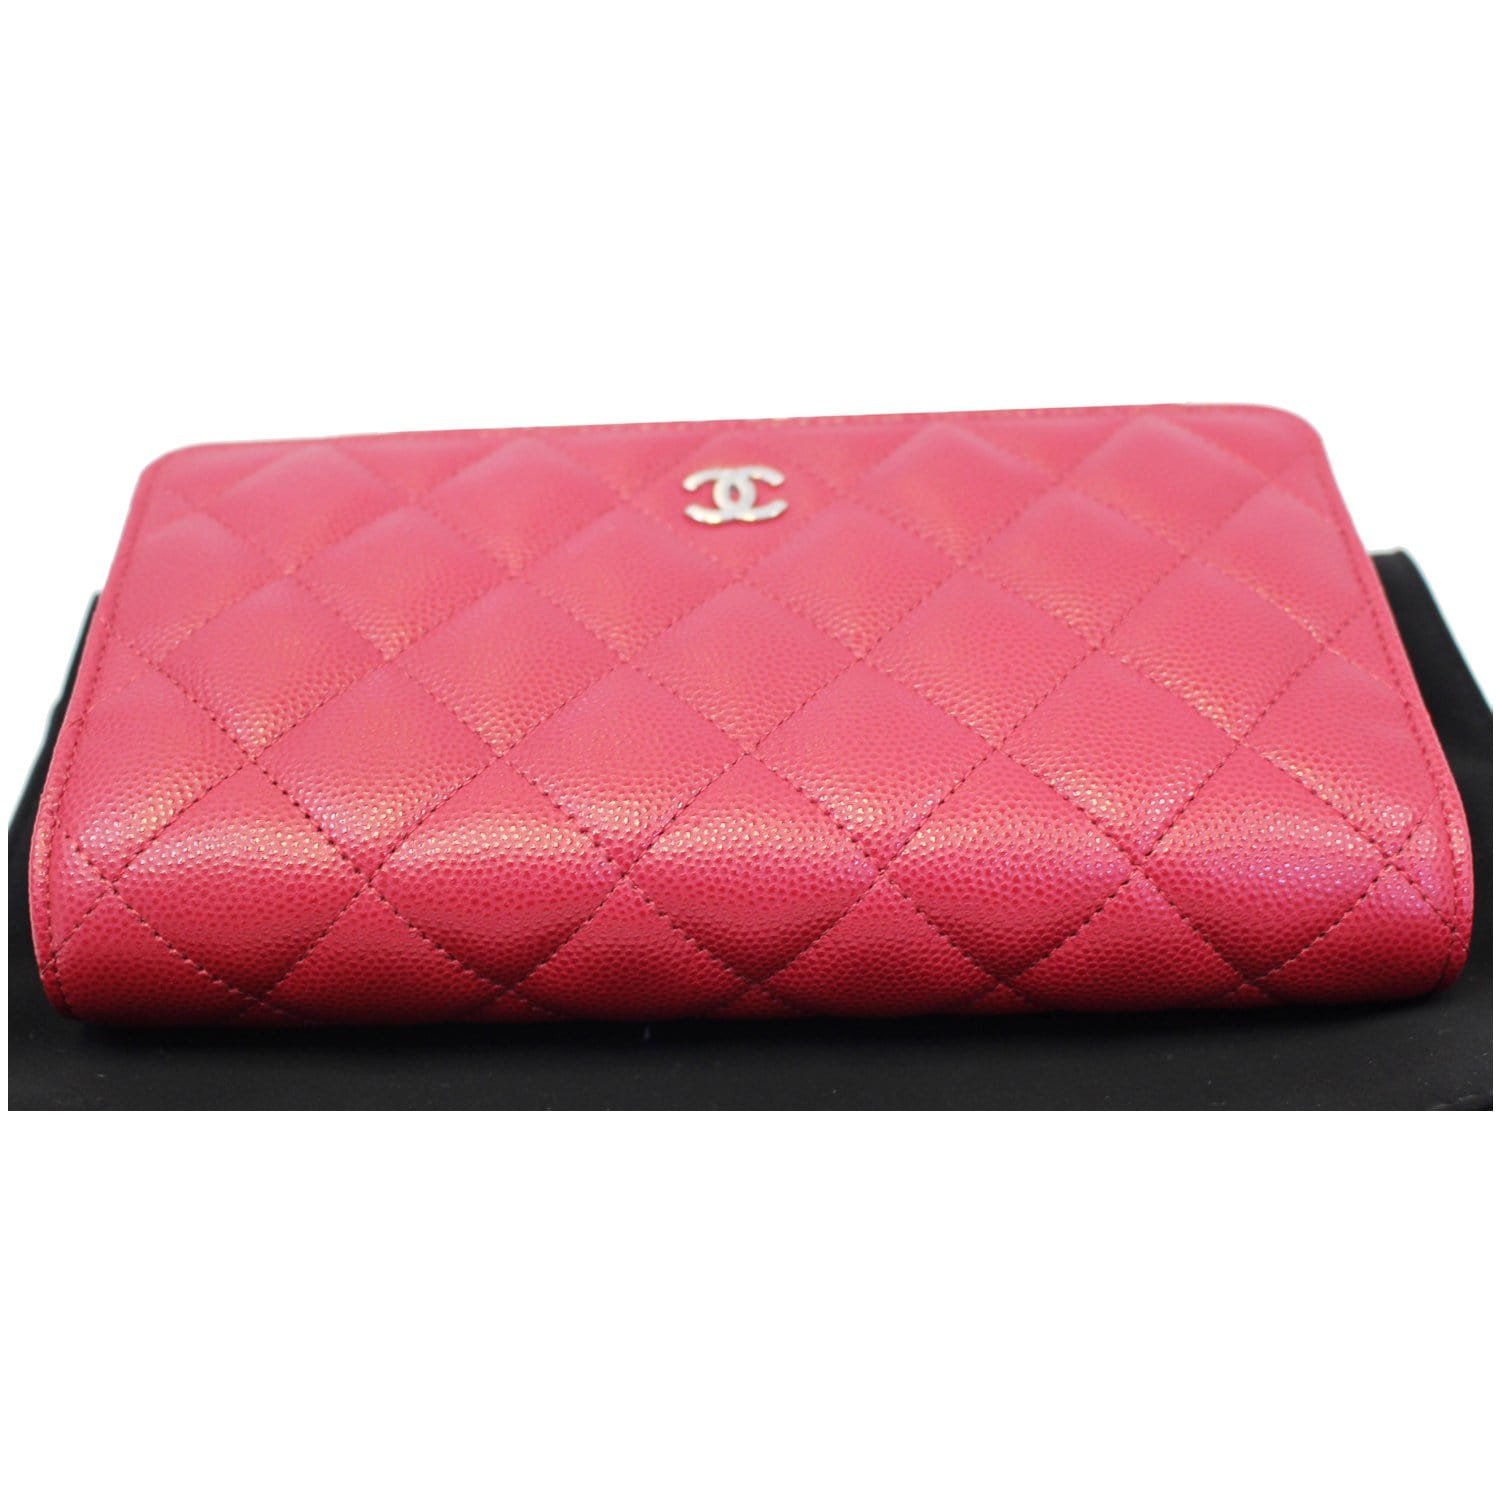 Wallet on chain leather crossbody bag Chanel Red in Leather - 29739910